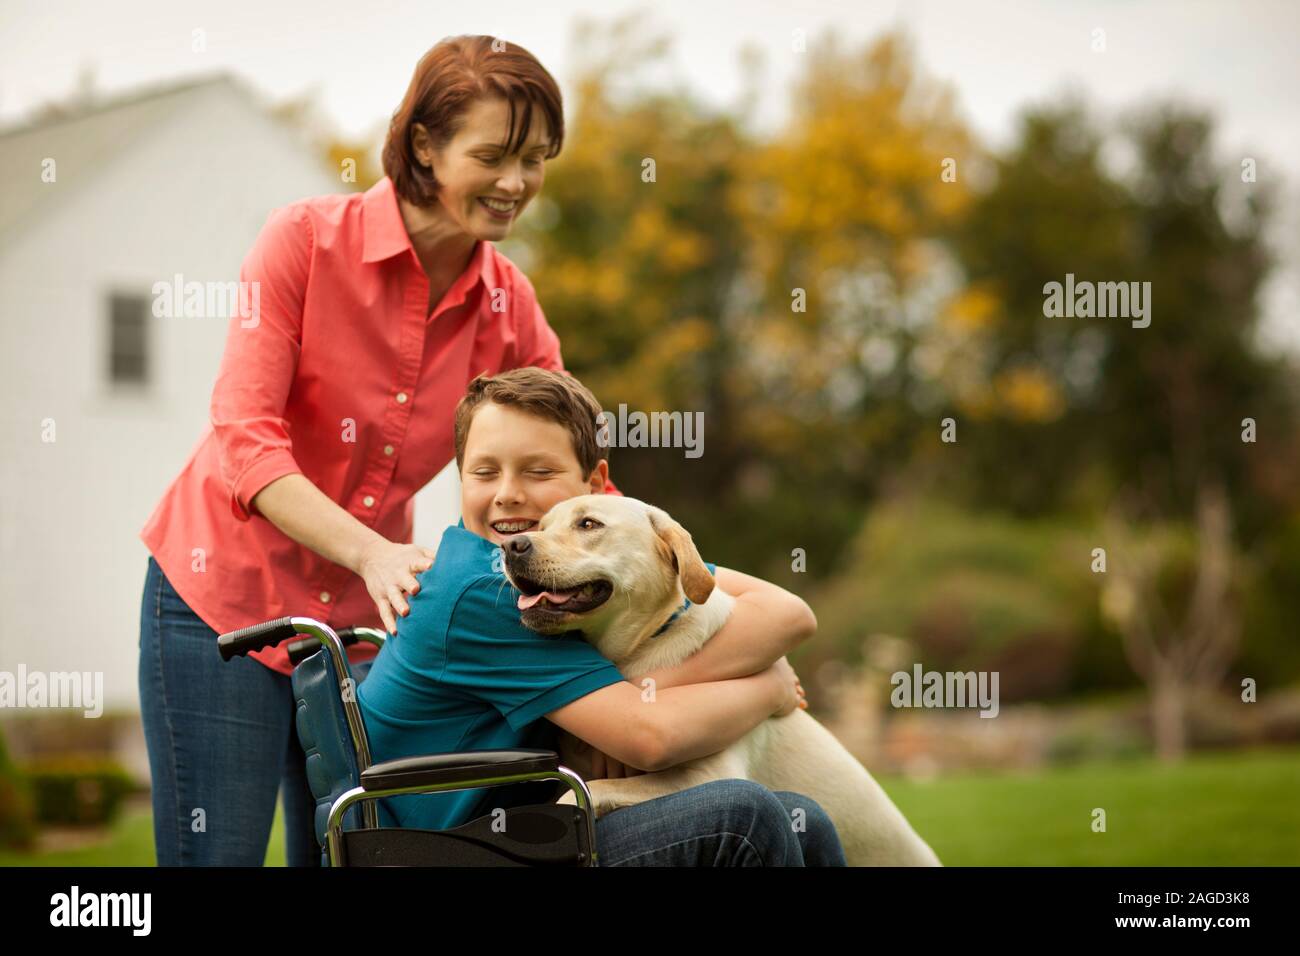 Smiling teenage boy hugging a dog while his mother looks on. Stock Photo